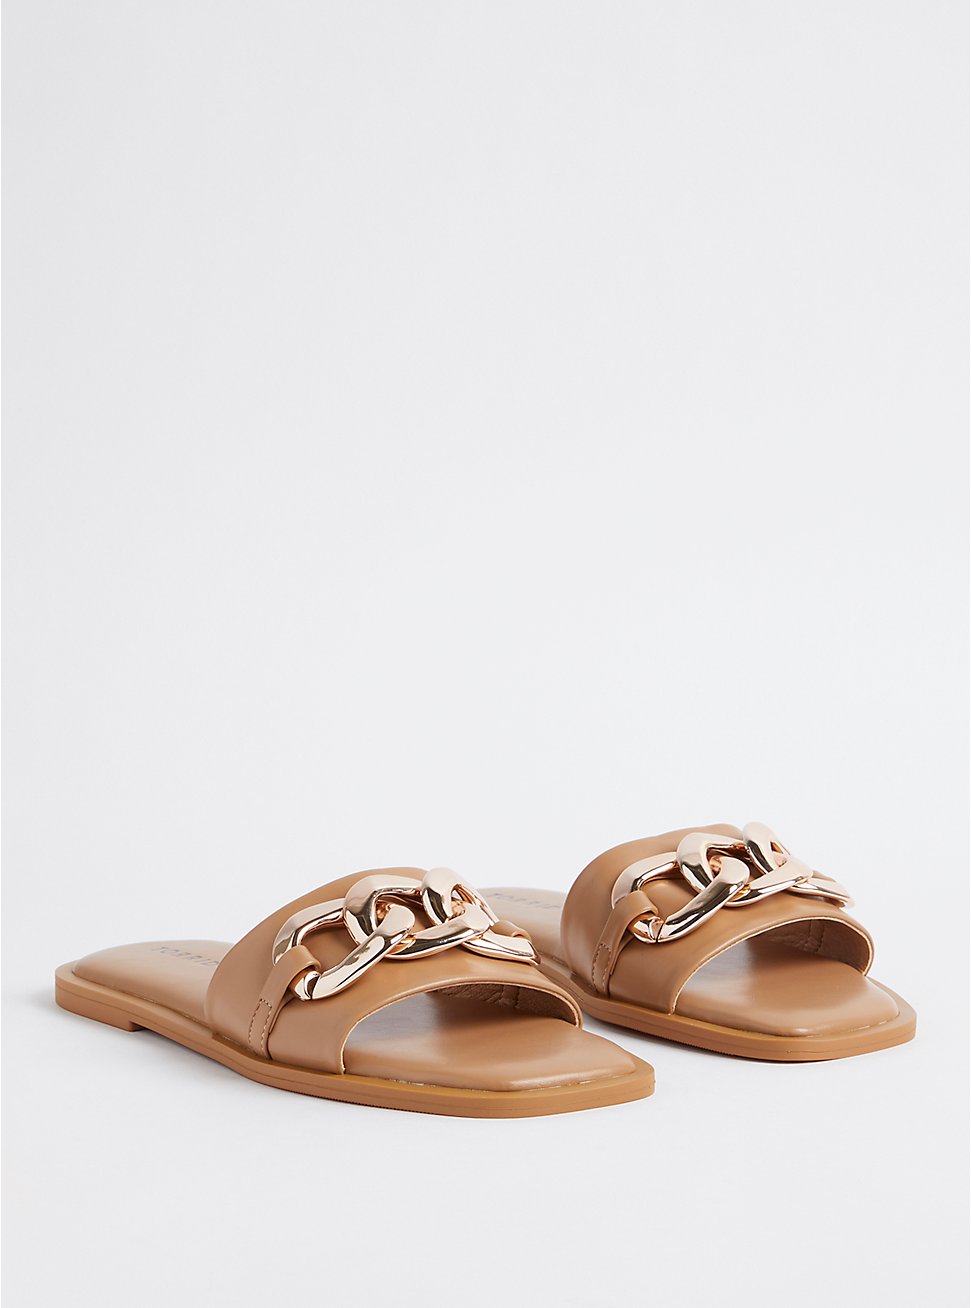 Plus Size Oversized Chain Slide - Taupe  (WW) , TAUPE, hi-res